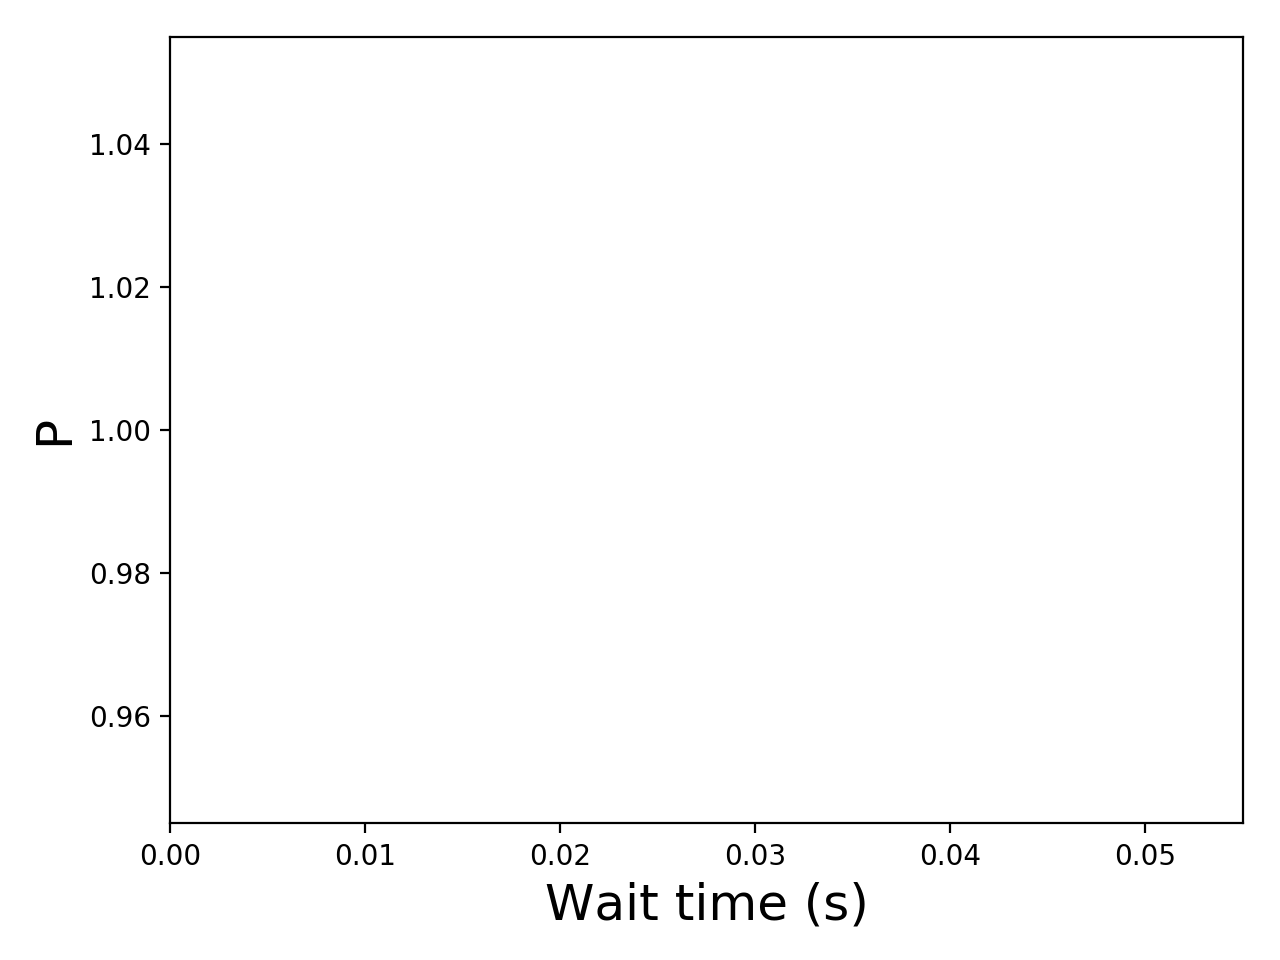 Task wait time CDF graph for the askalon-new_ee11 trace.